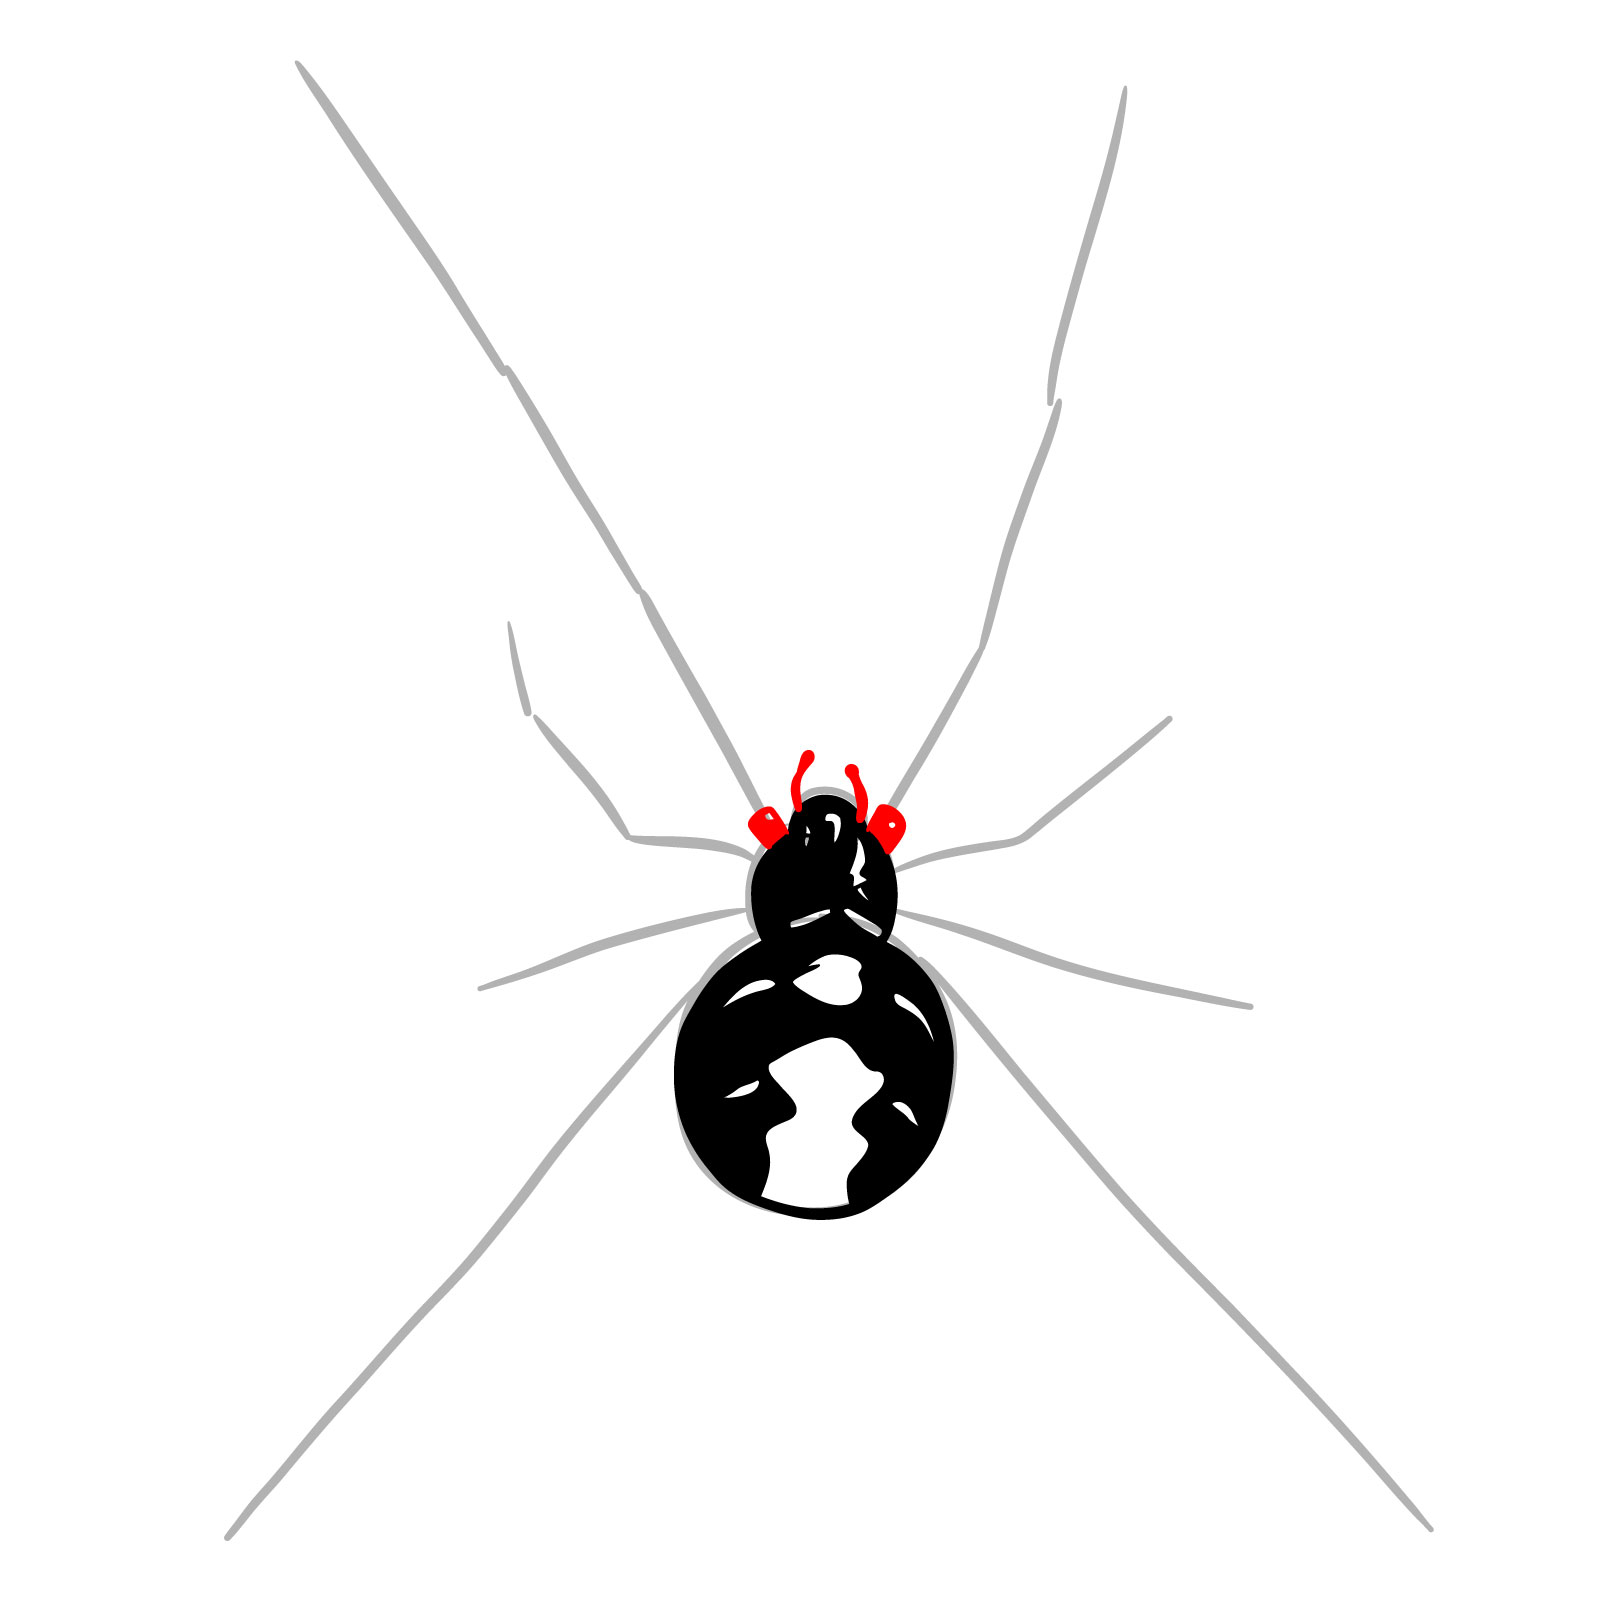 How to draw a Black Widow Spider - step 09